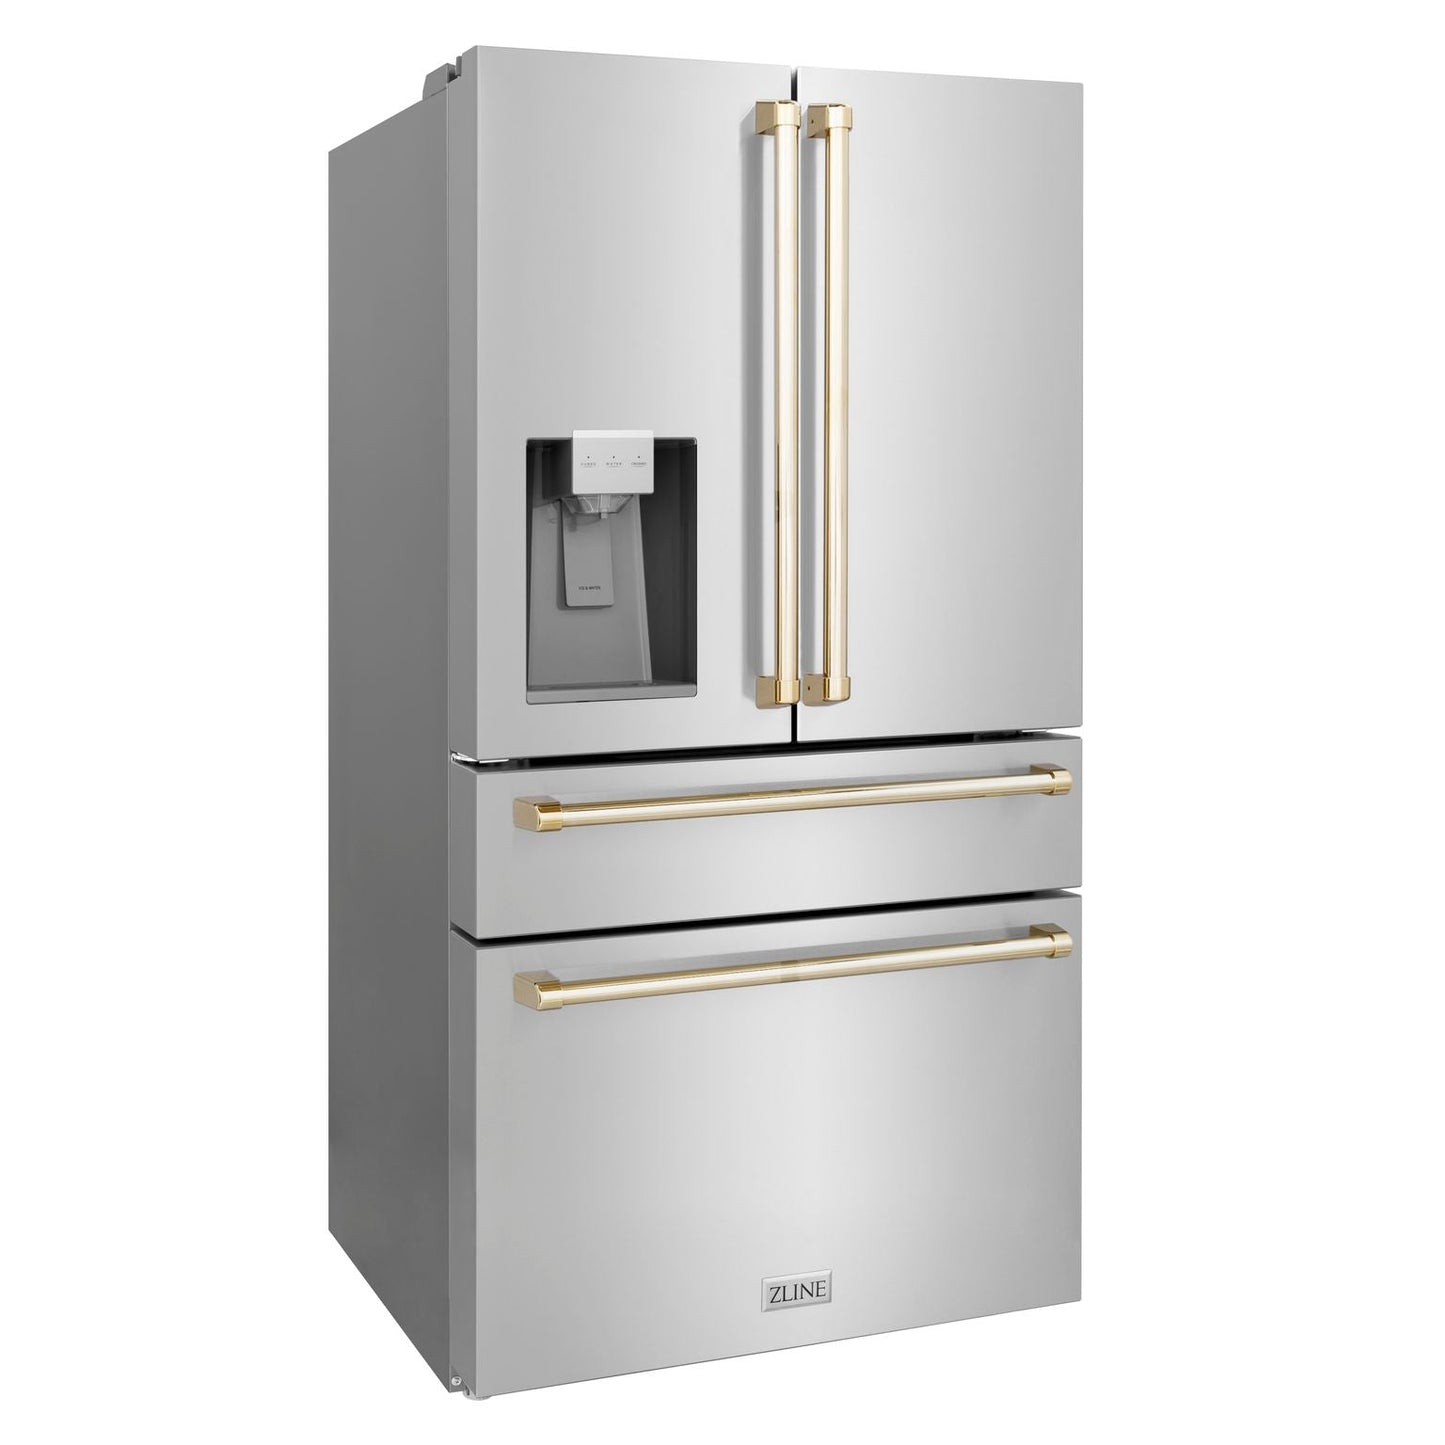 ZLINE 36 In. Autograph French Door Refrigerator with Water and Ice Dispenser in Fingerprint Resistant Stainless Steel with Gold Accents, RFMZ-W-36-G